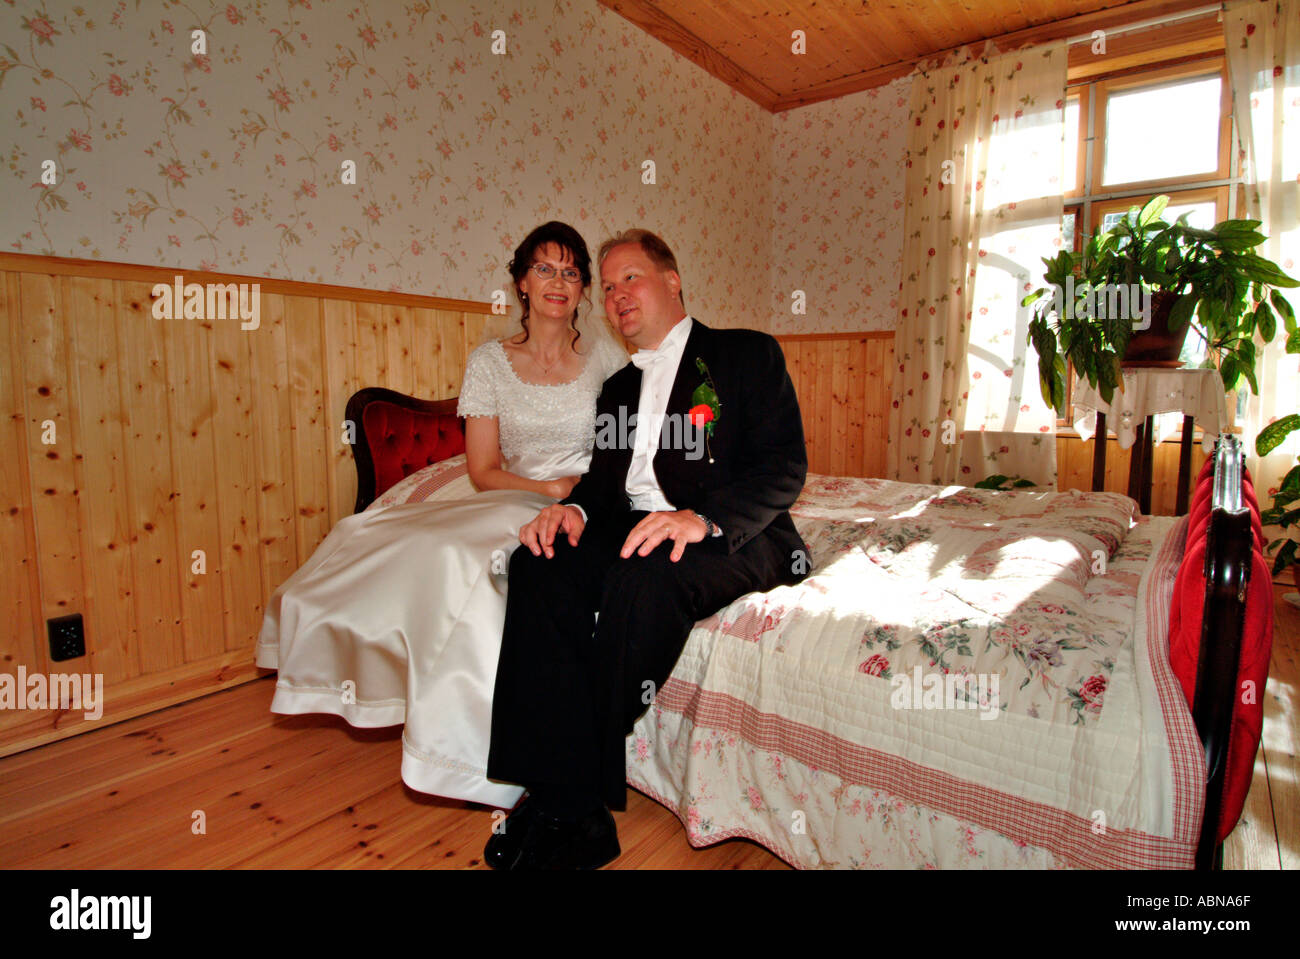 bridal pair sitting on a double bed MR Stock Photo